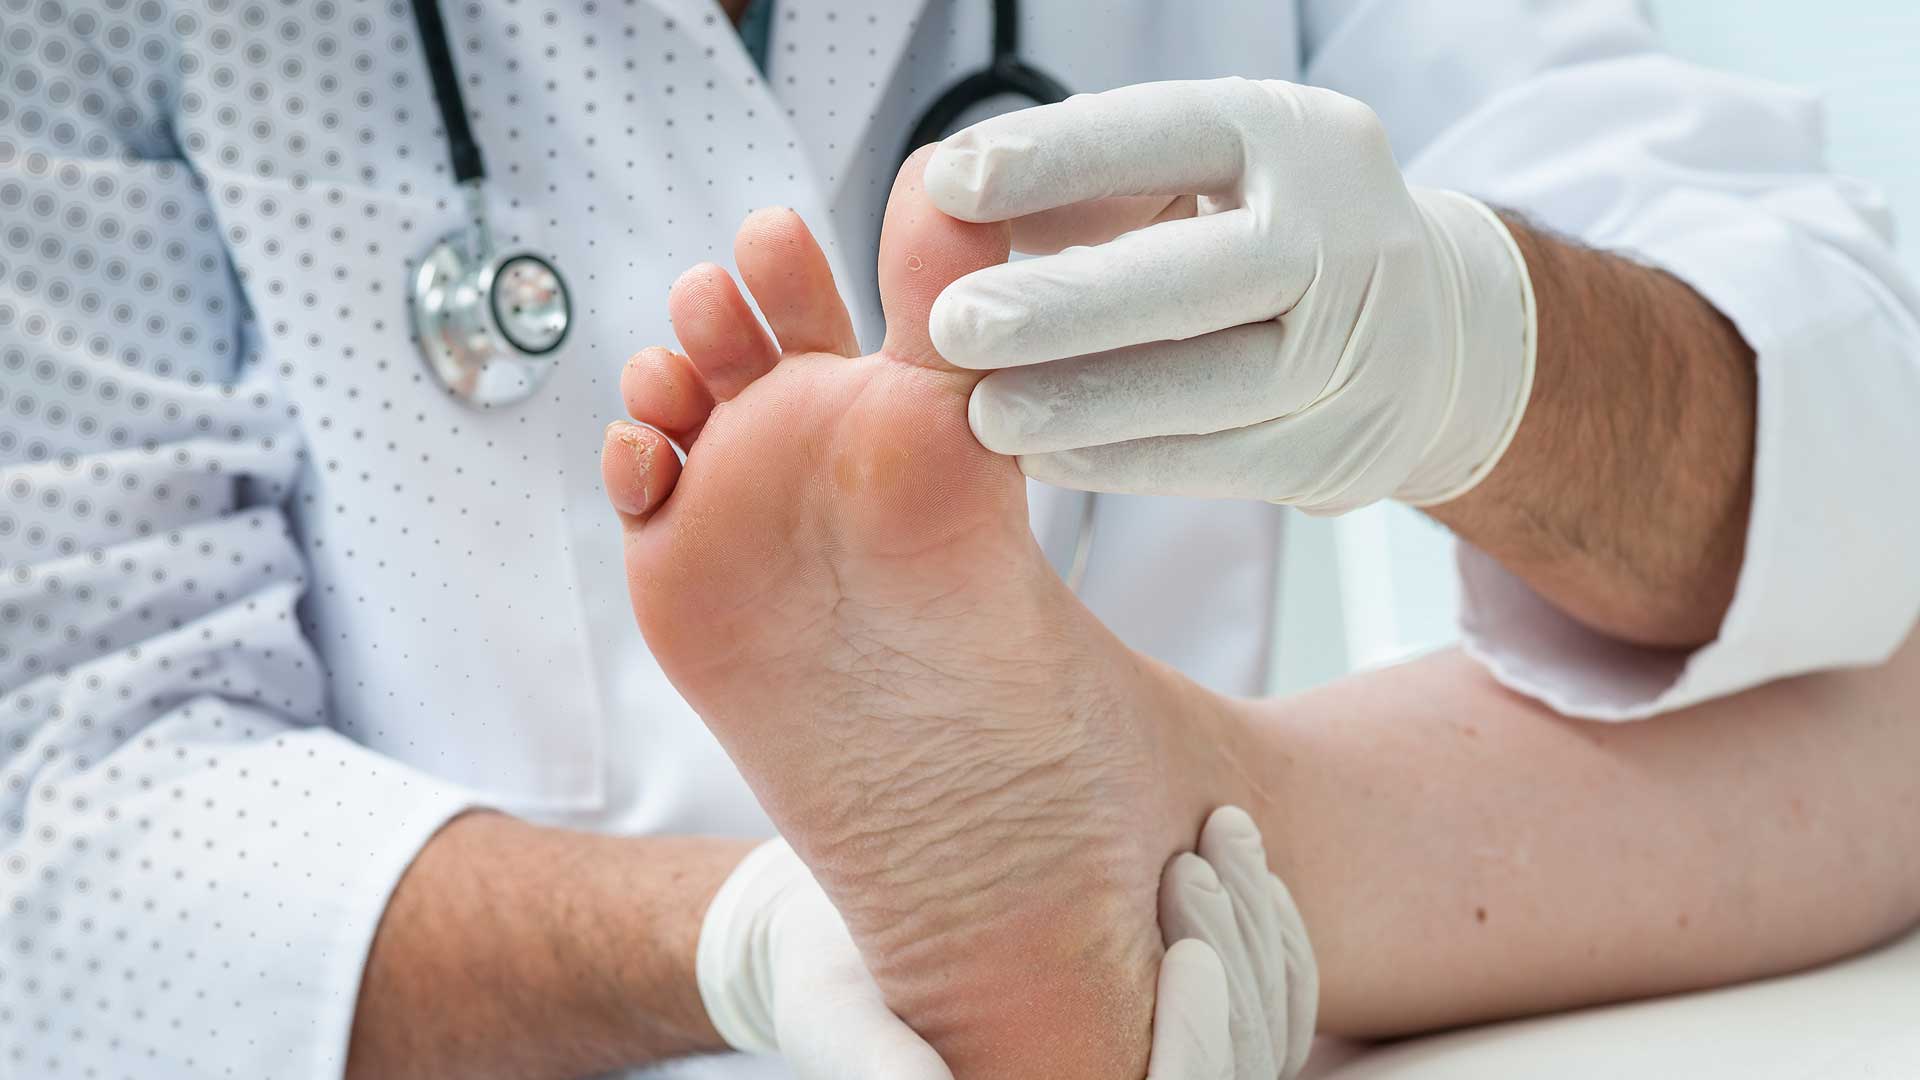 Birmingham Foot Clinic Frequently Asked Quesrtions